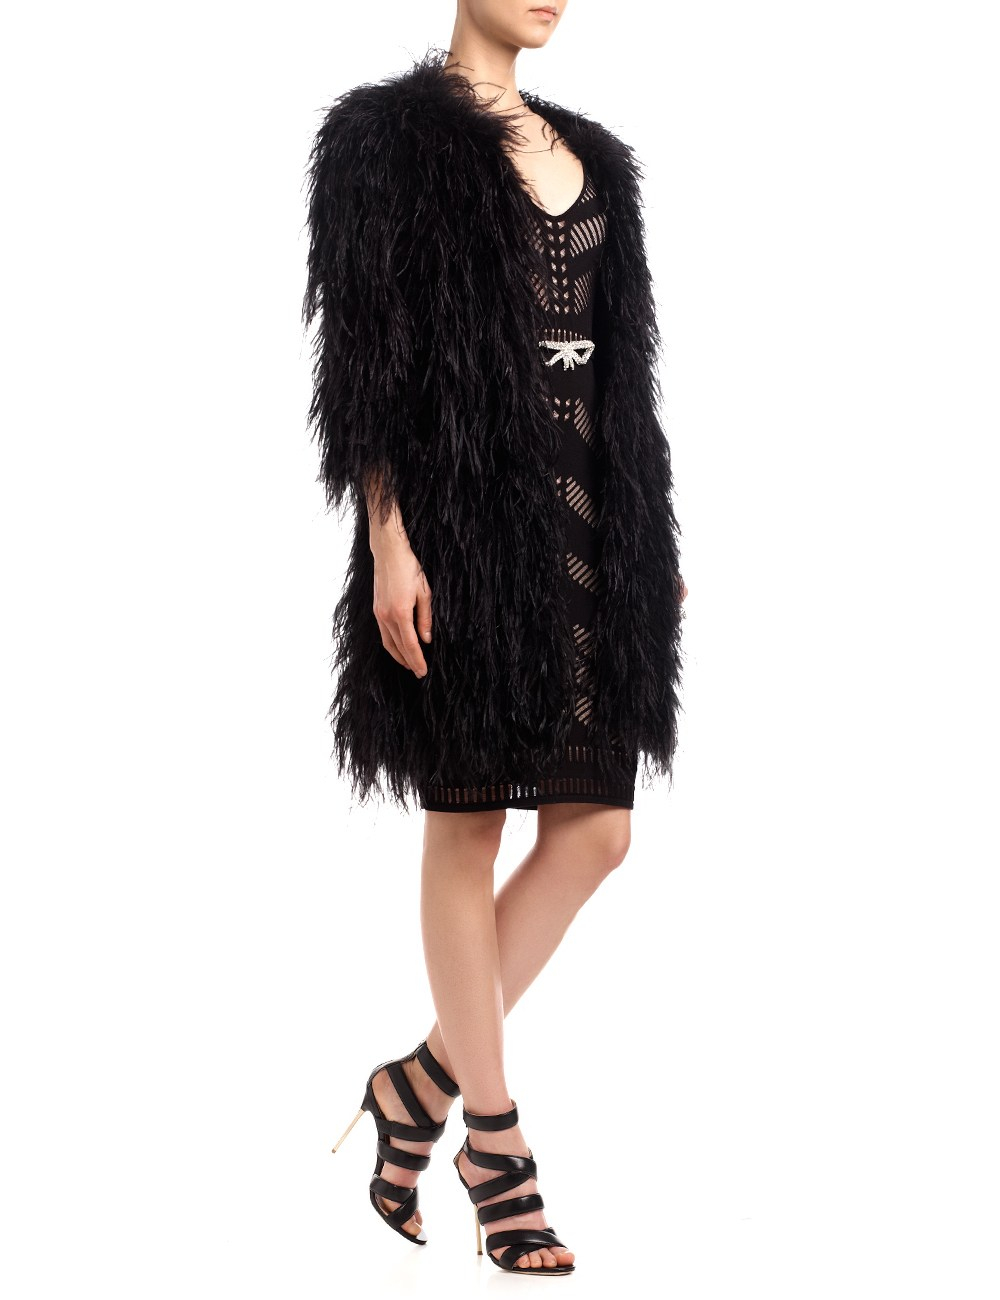 Temperley london Black Feathered Coat in Black | Lyst